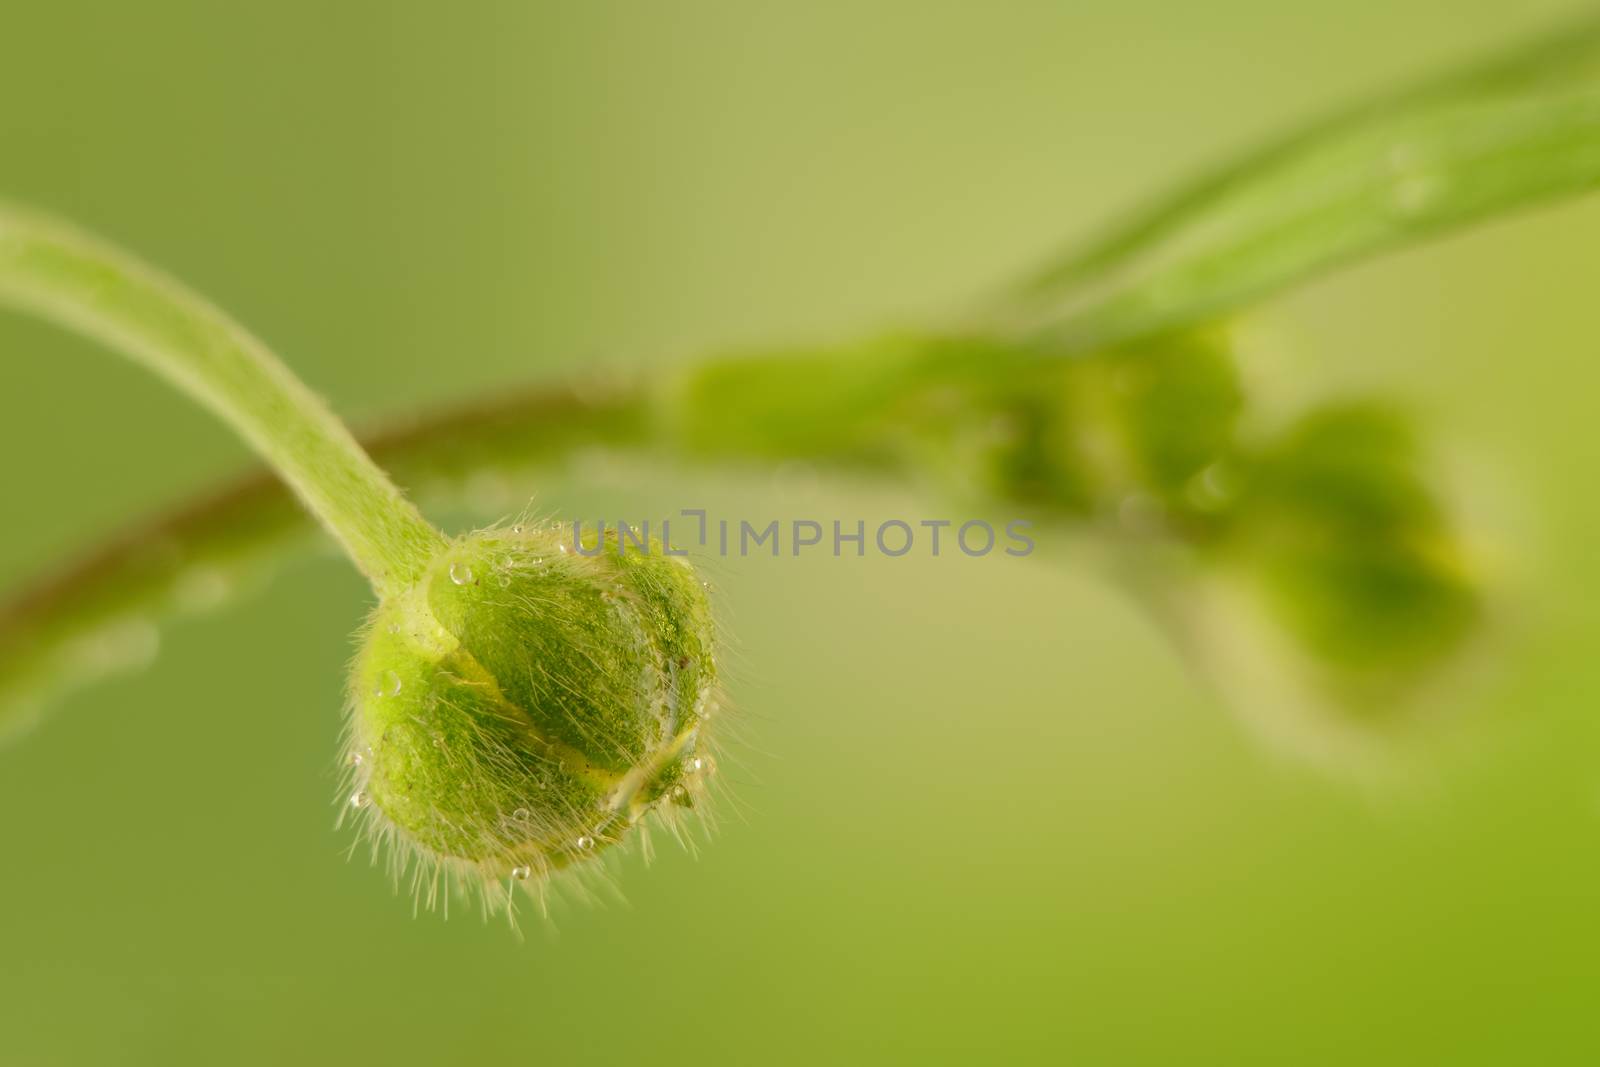 tiny green flower bud with water droplets